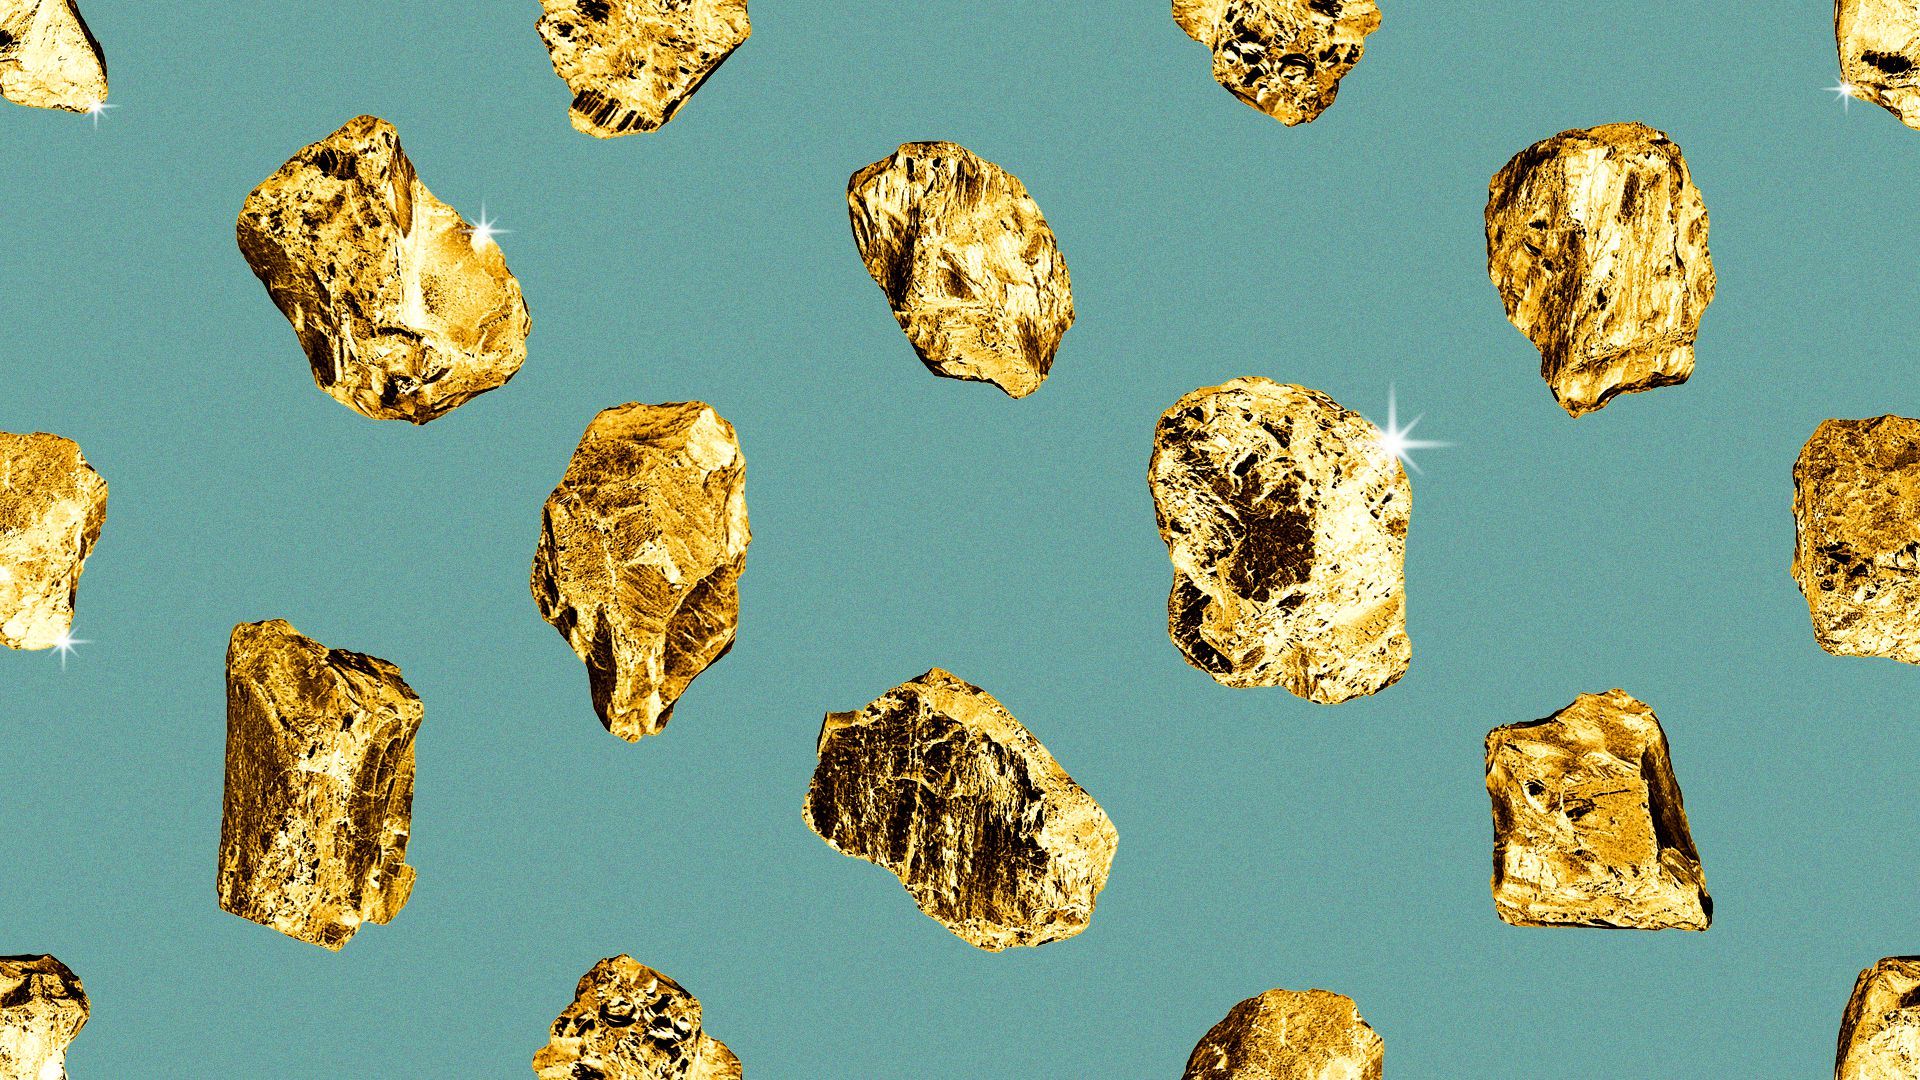 Illustration of a pattern of gold nuggets.